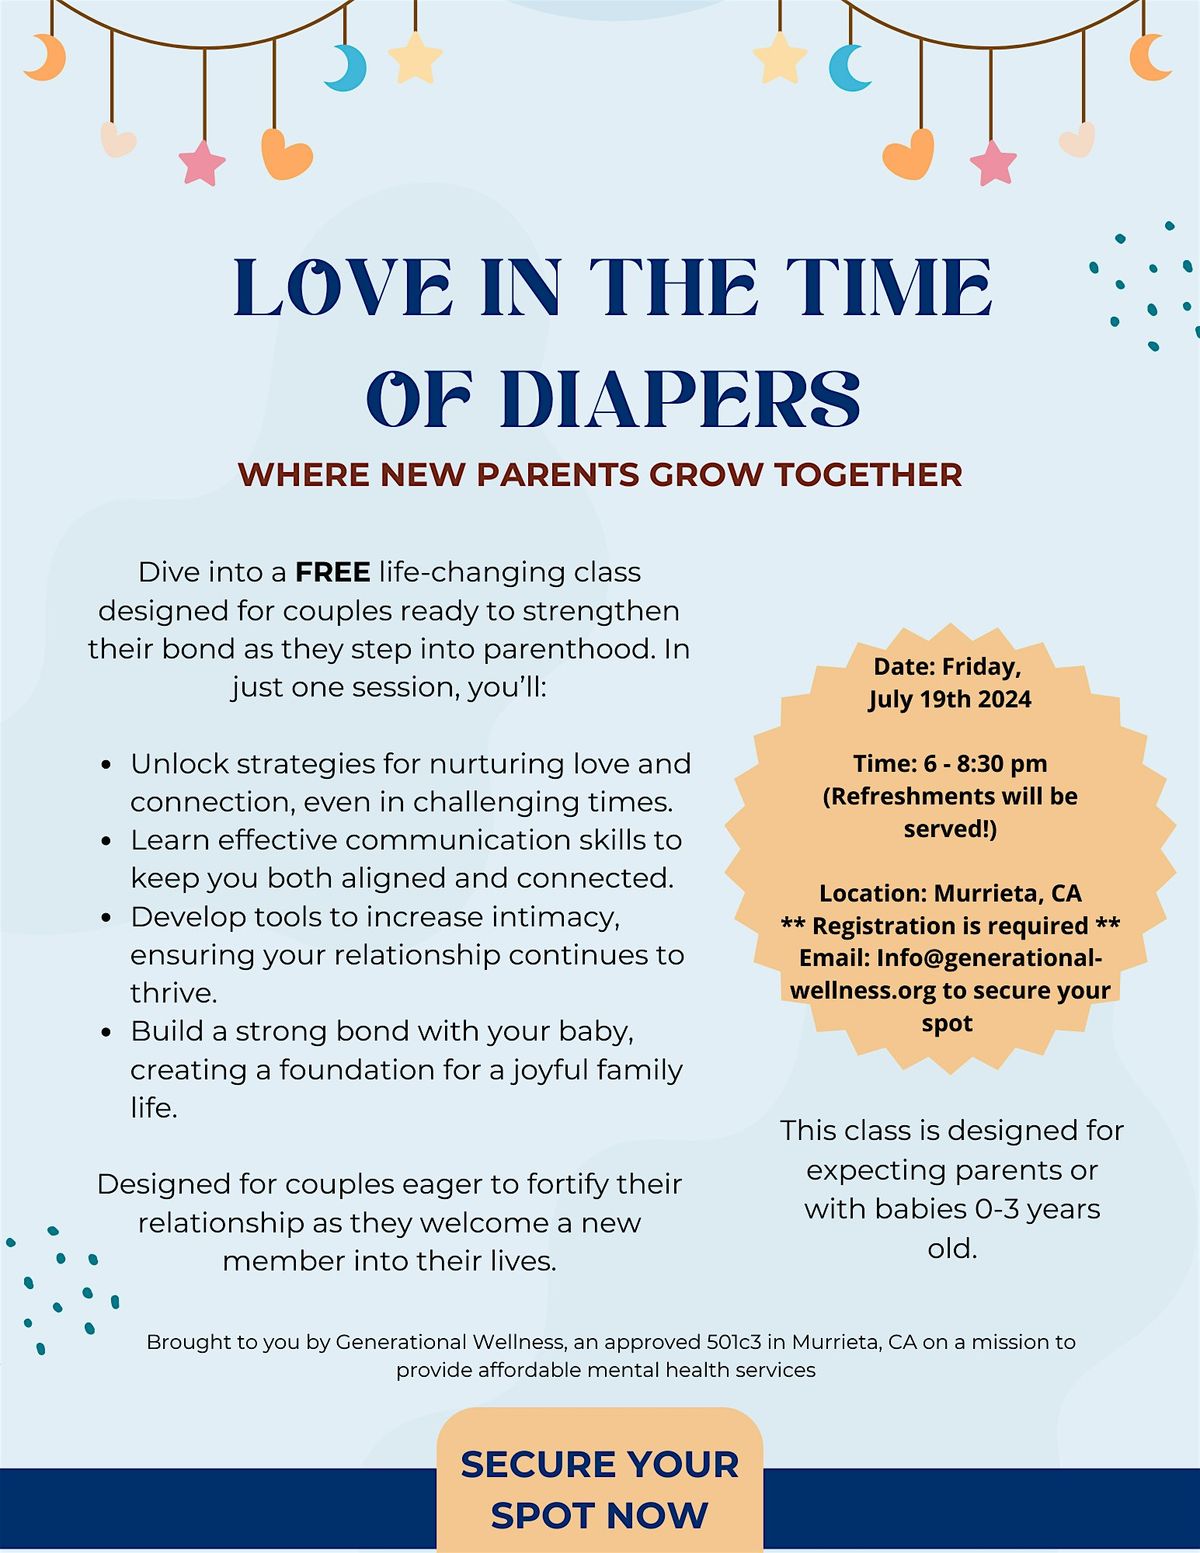 Love in the Time of Diapers: Where New Parents Grow Together